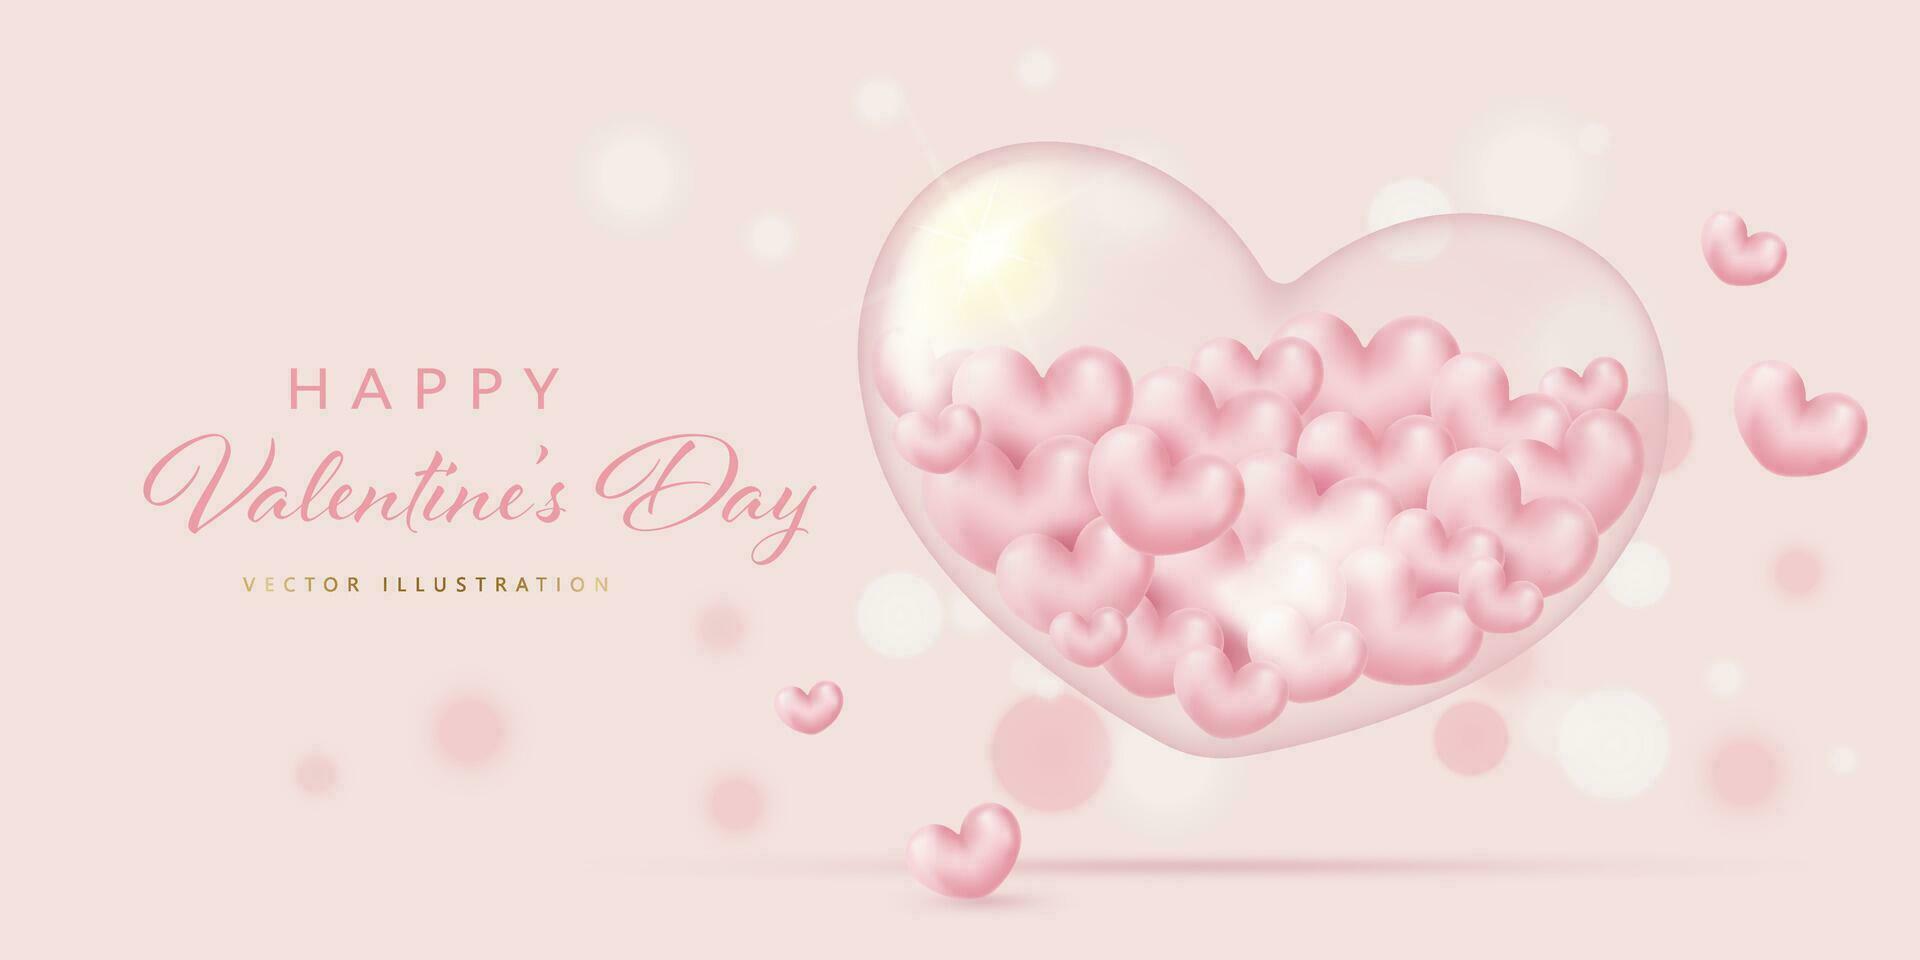 Valentines Day Elegant Banner with Transparent Glass Heart with small pink hearts inside. Vector illustration